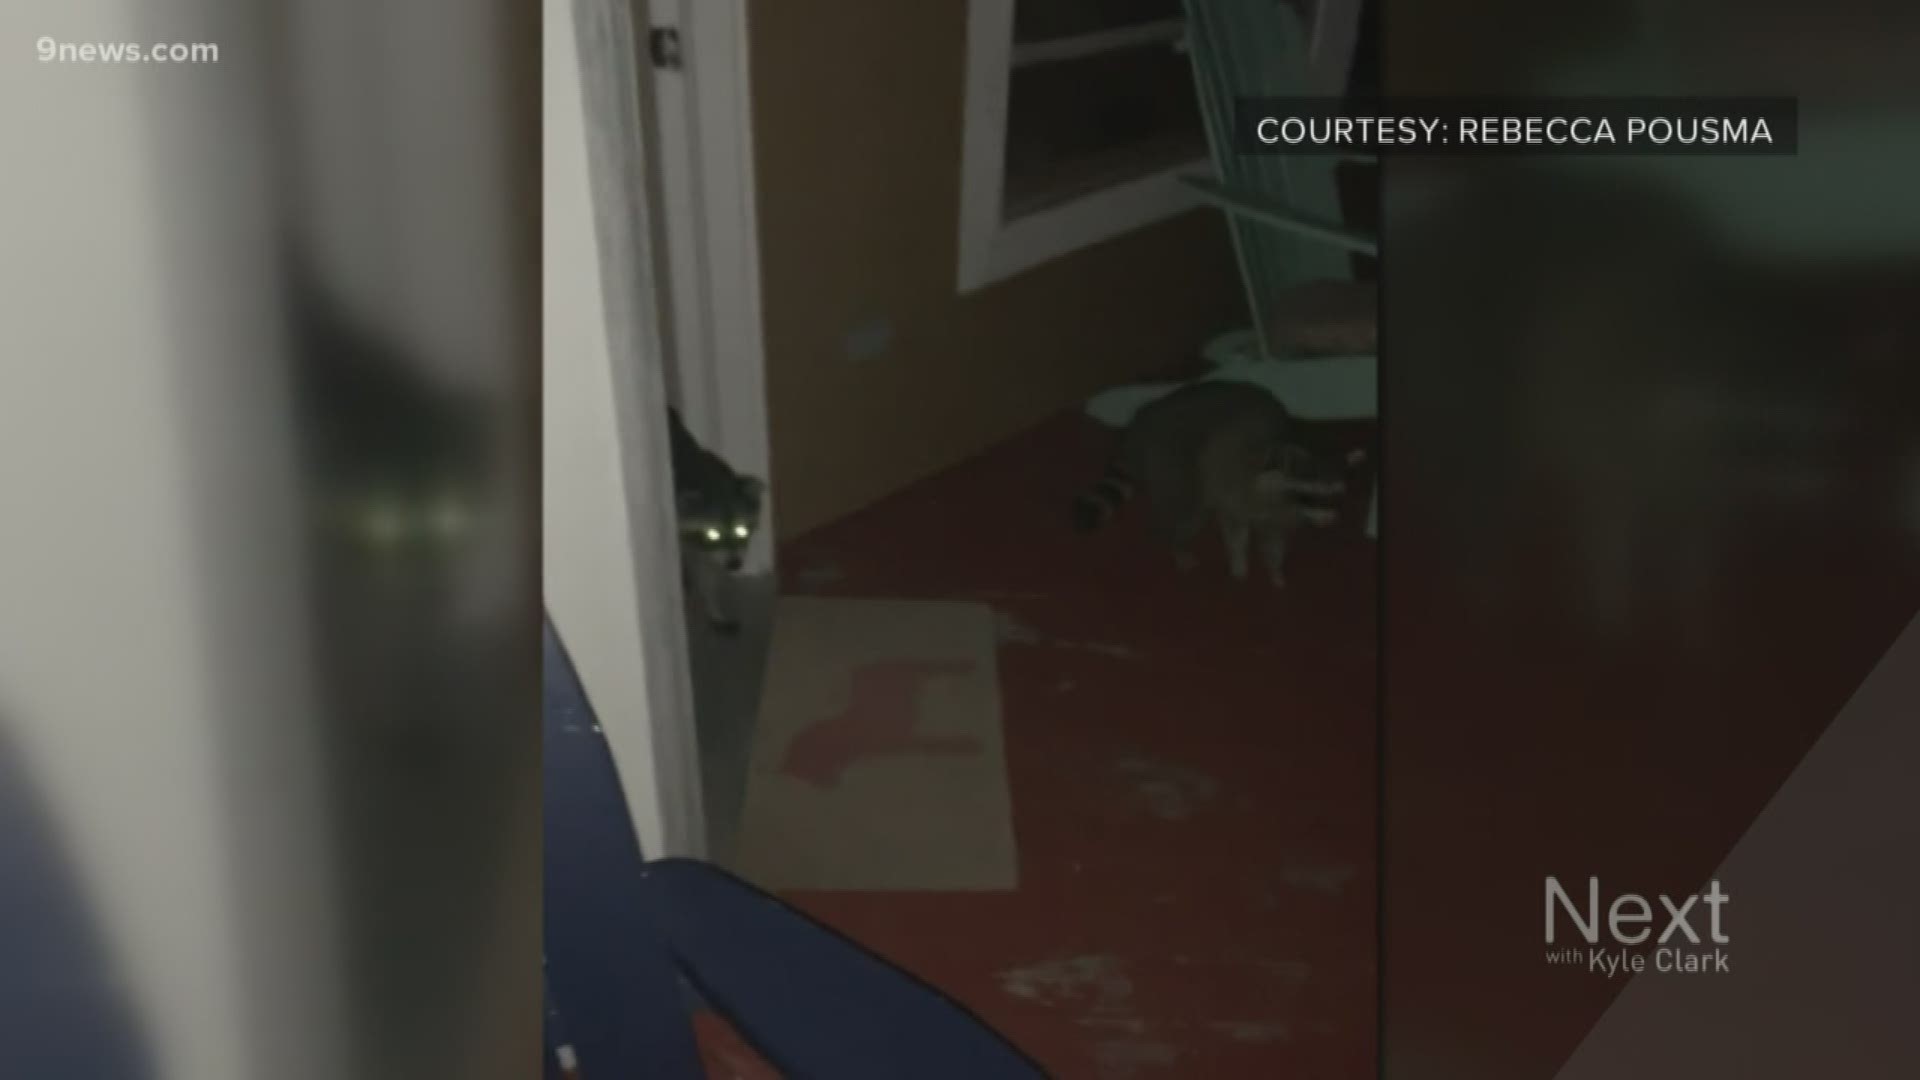 Rebecca Pousma had some late-night visitors to her house in Highlands Ranch - raccoons that invited themselves inside for dinner and made themselves at home.